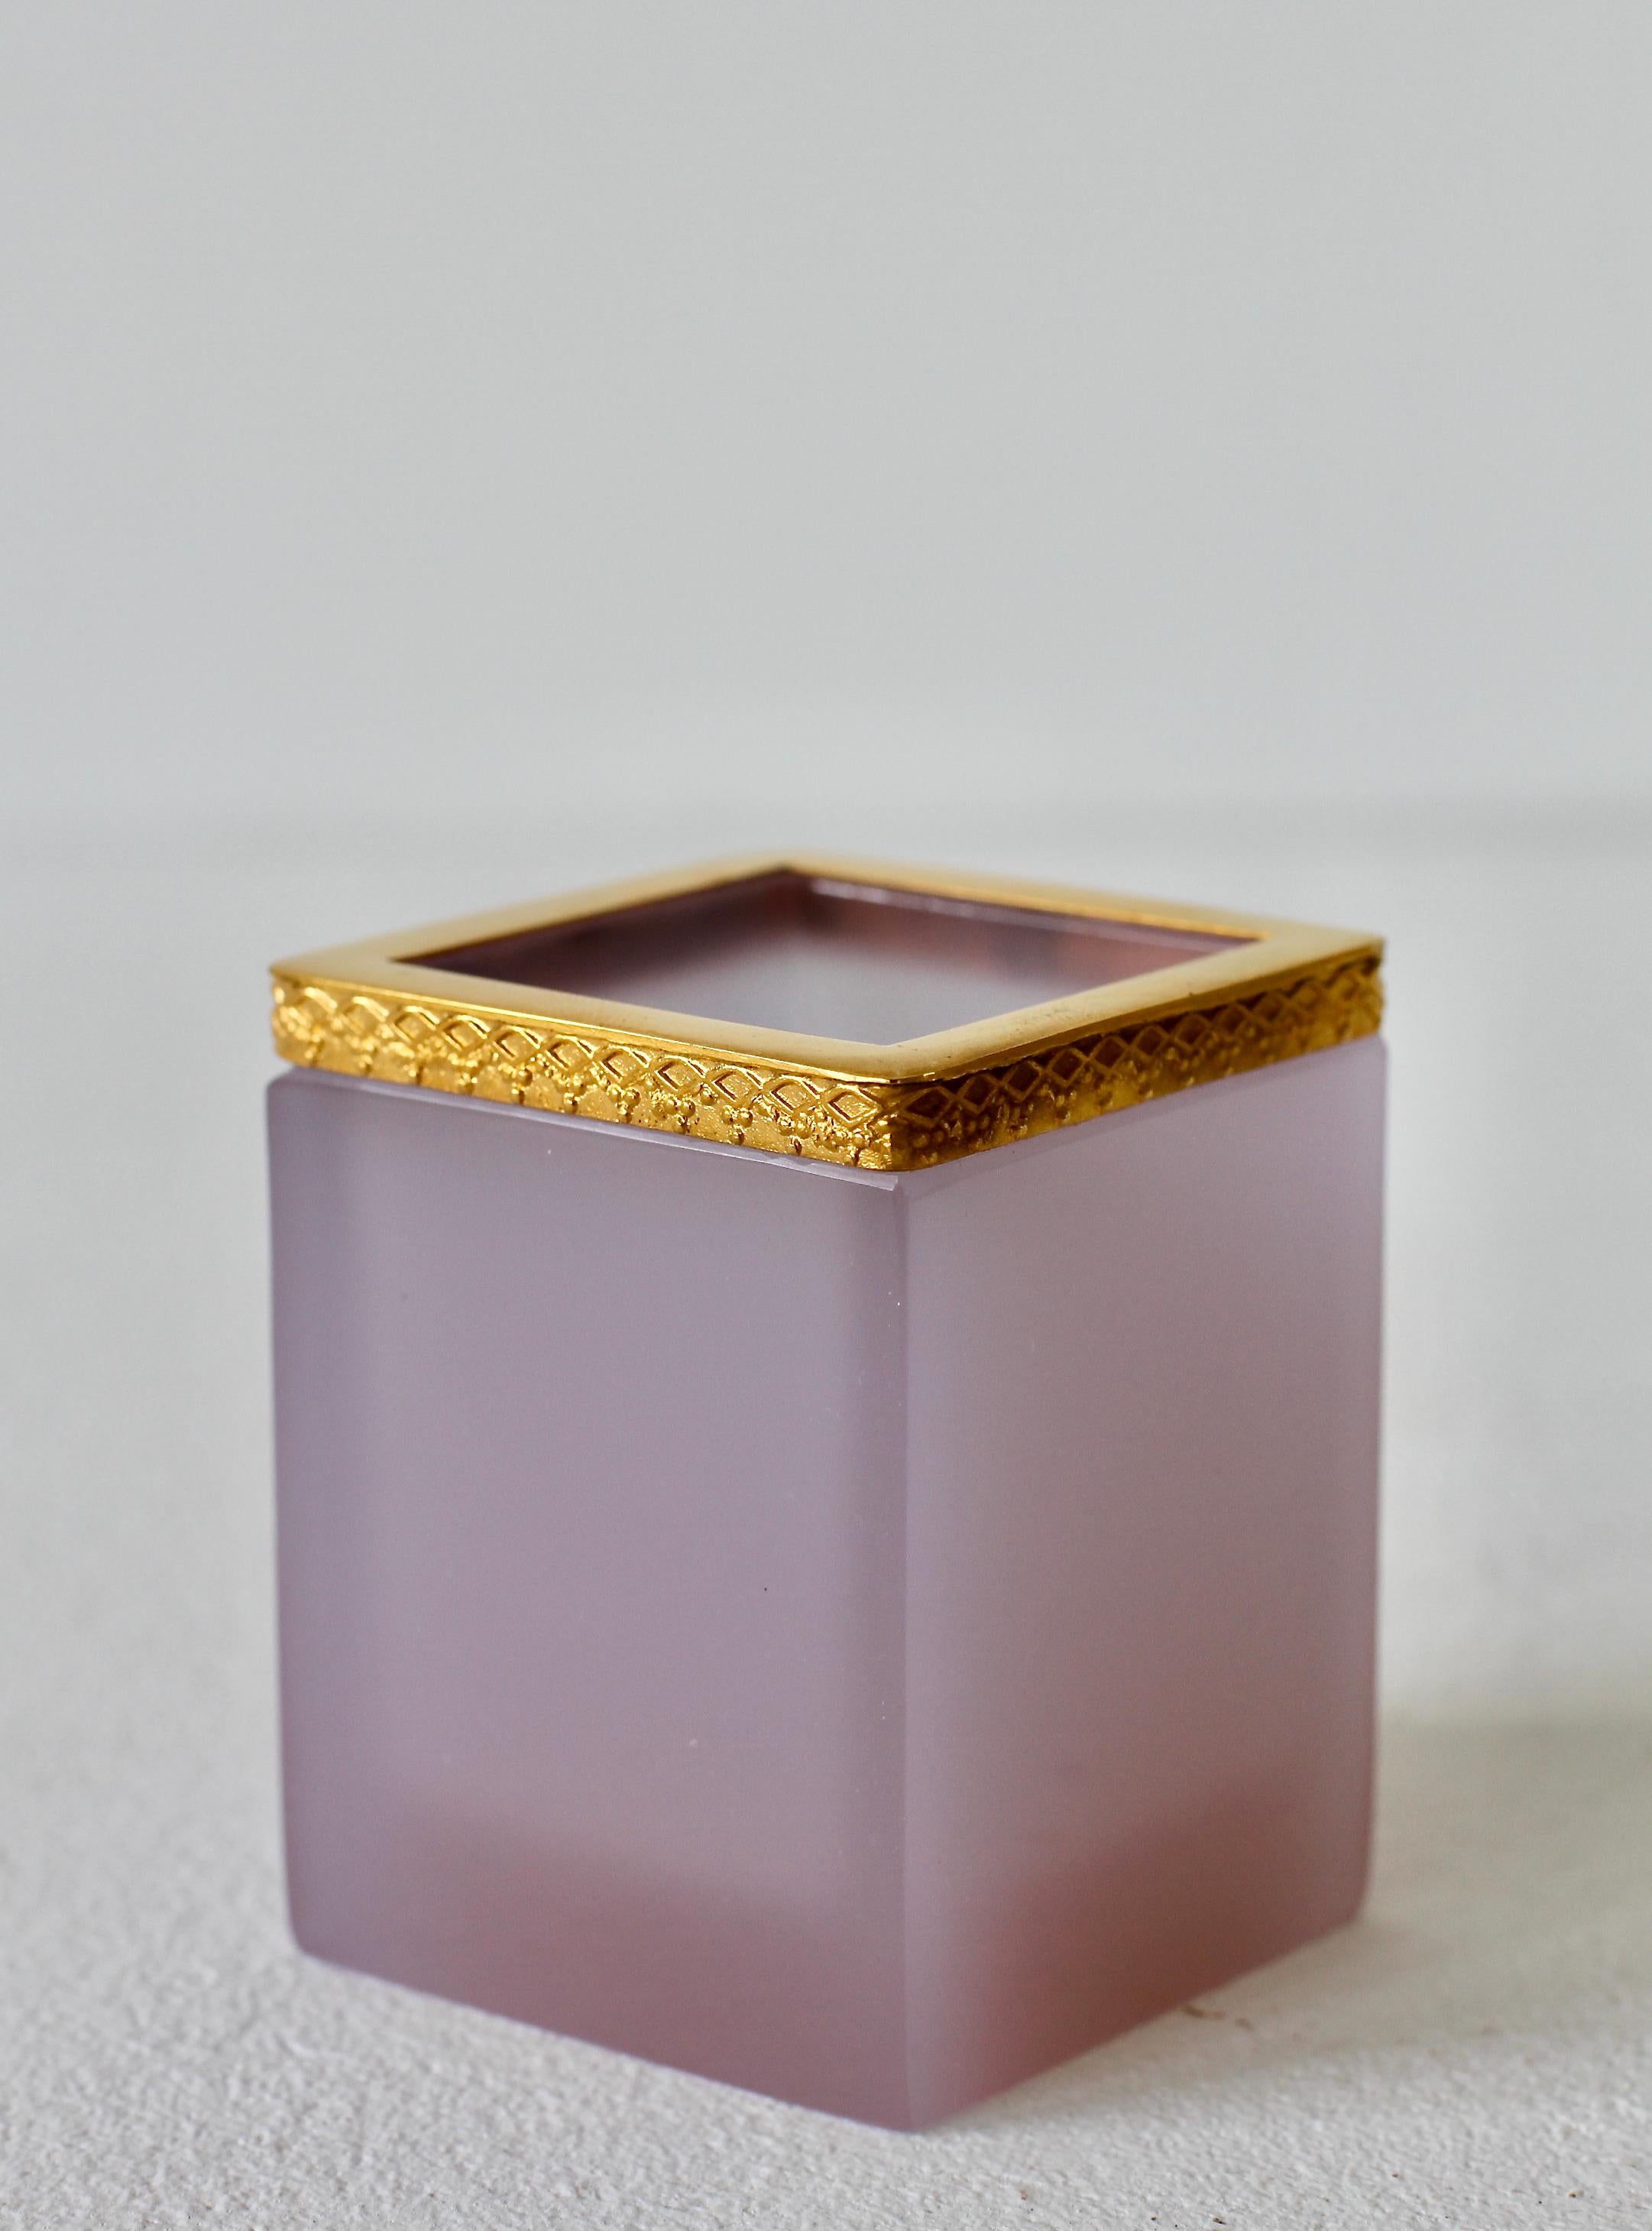 Mid-Century, vintage 'Opalino' Murano glass pen holder with an embossed gold plated rim attributed to Cenedese, circa 1950-1970. Wonderful translucent color of soft pink with a 24 carat gold-plated metal rim / edge. Simplistic yet elegant form. A